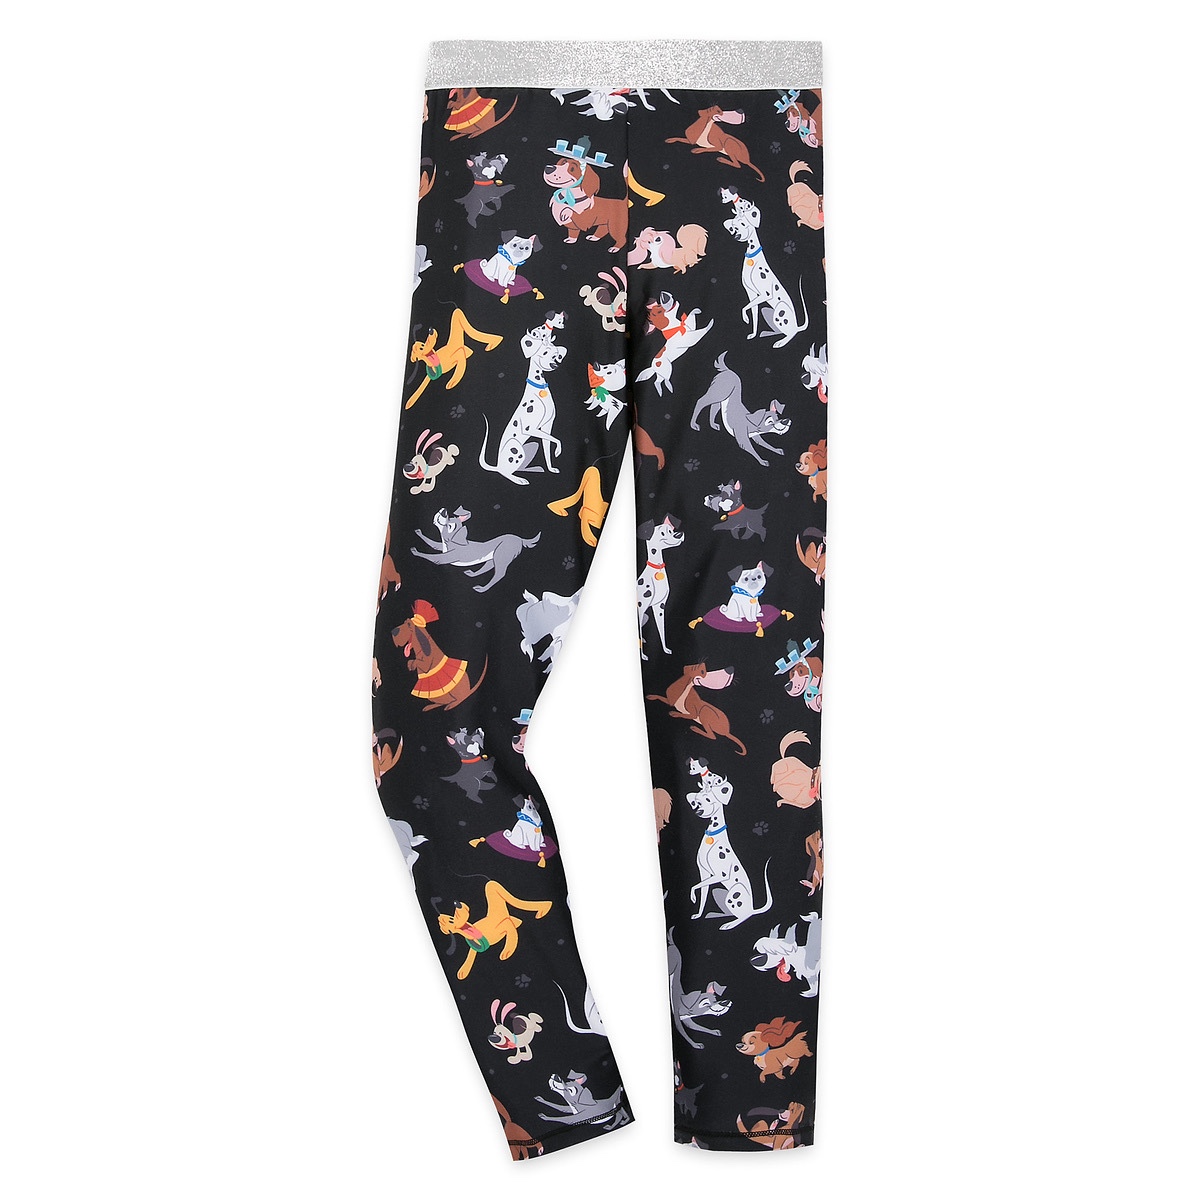 It's Reigning Cats & Dogs with Disney Apparel! - clothes